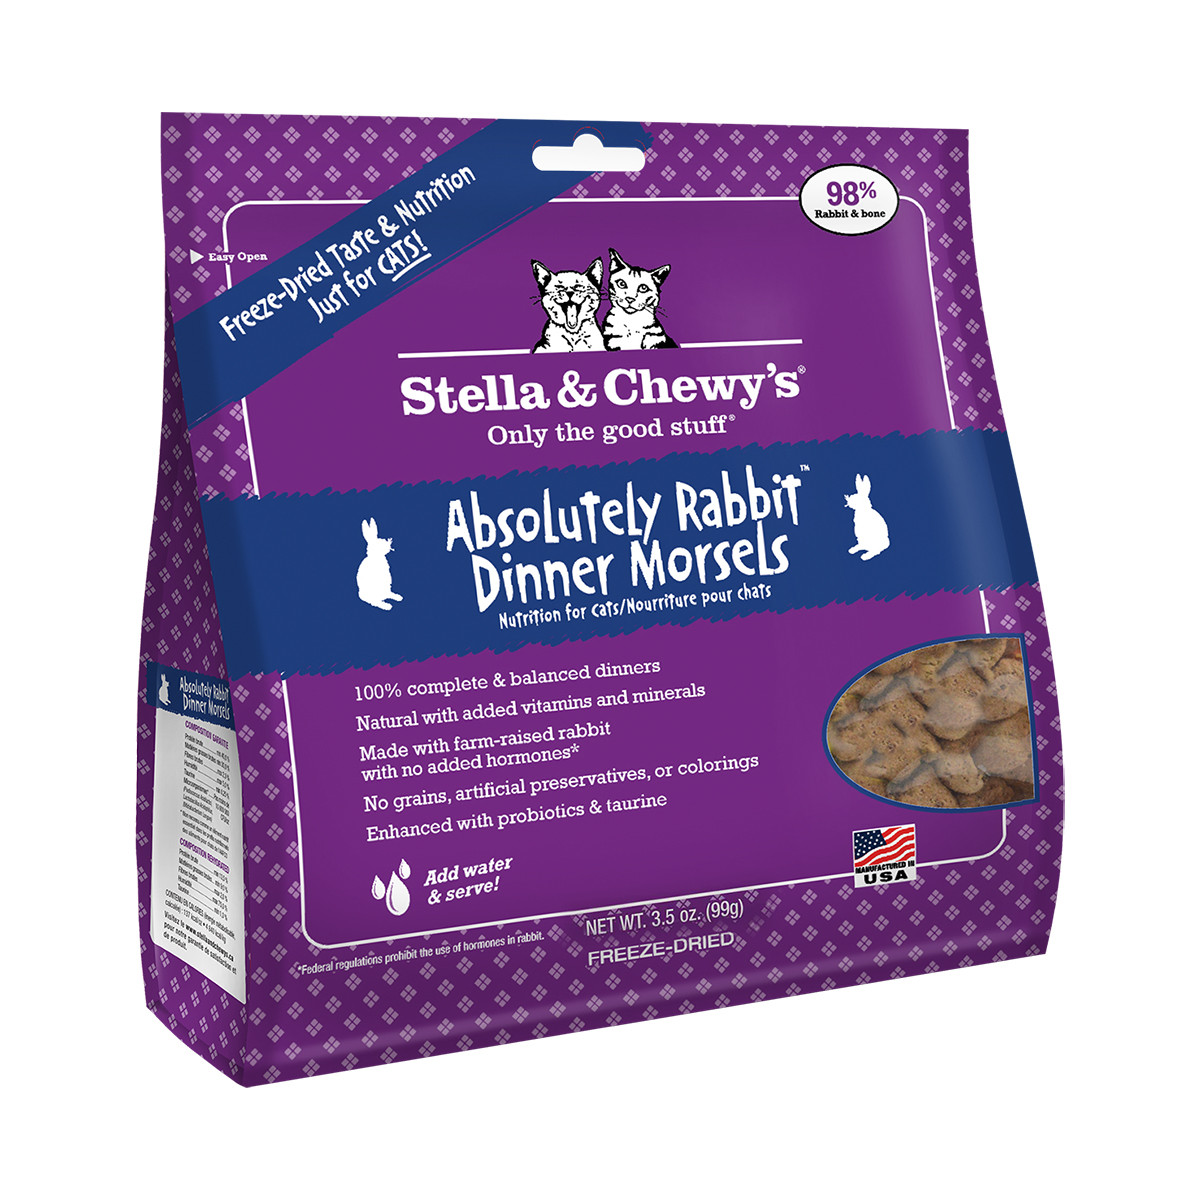 Stella & Chewy's Absolutely Rabbit Dinner Morsels FreezeDried Raw Cat